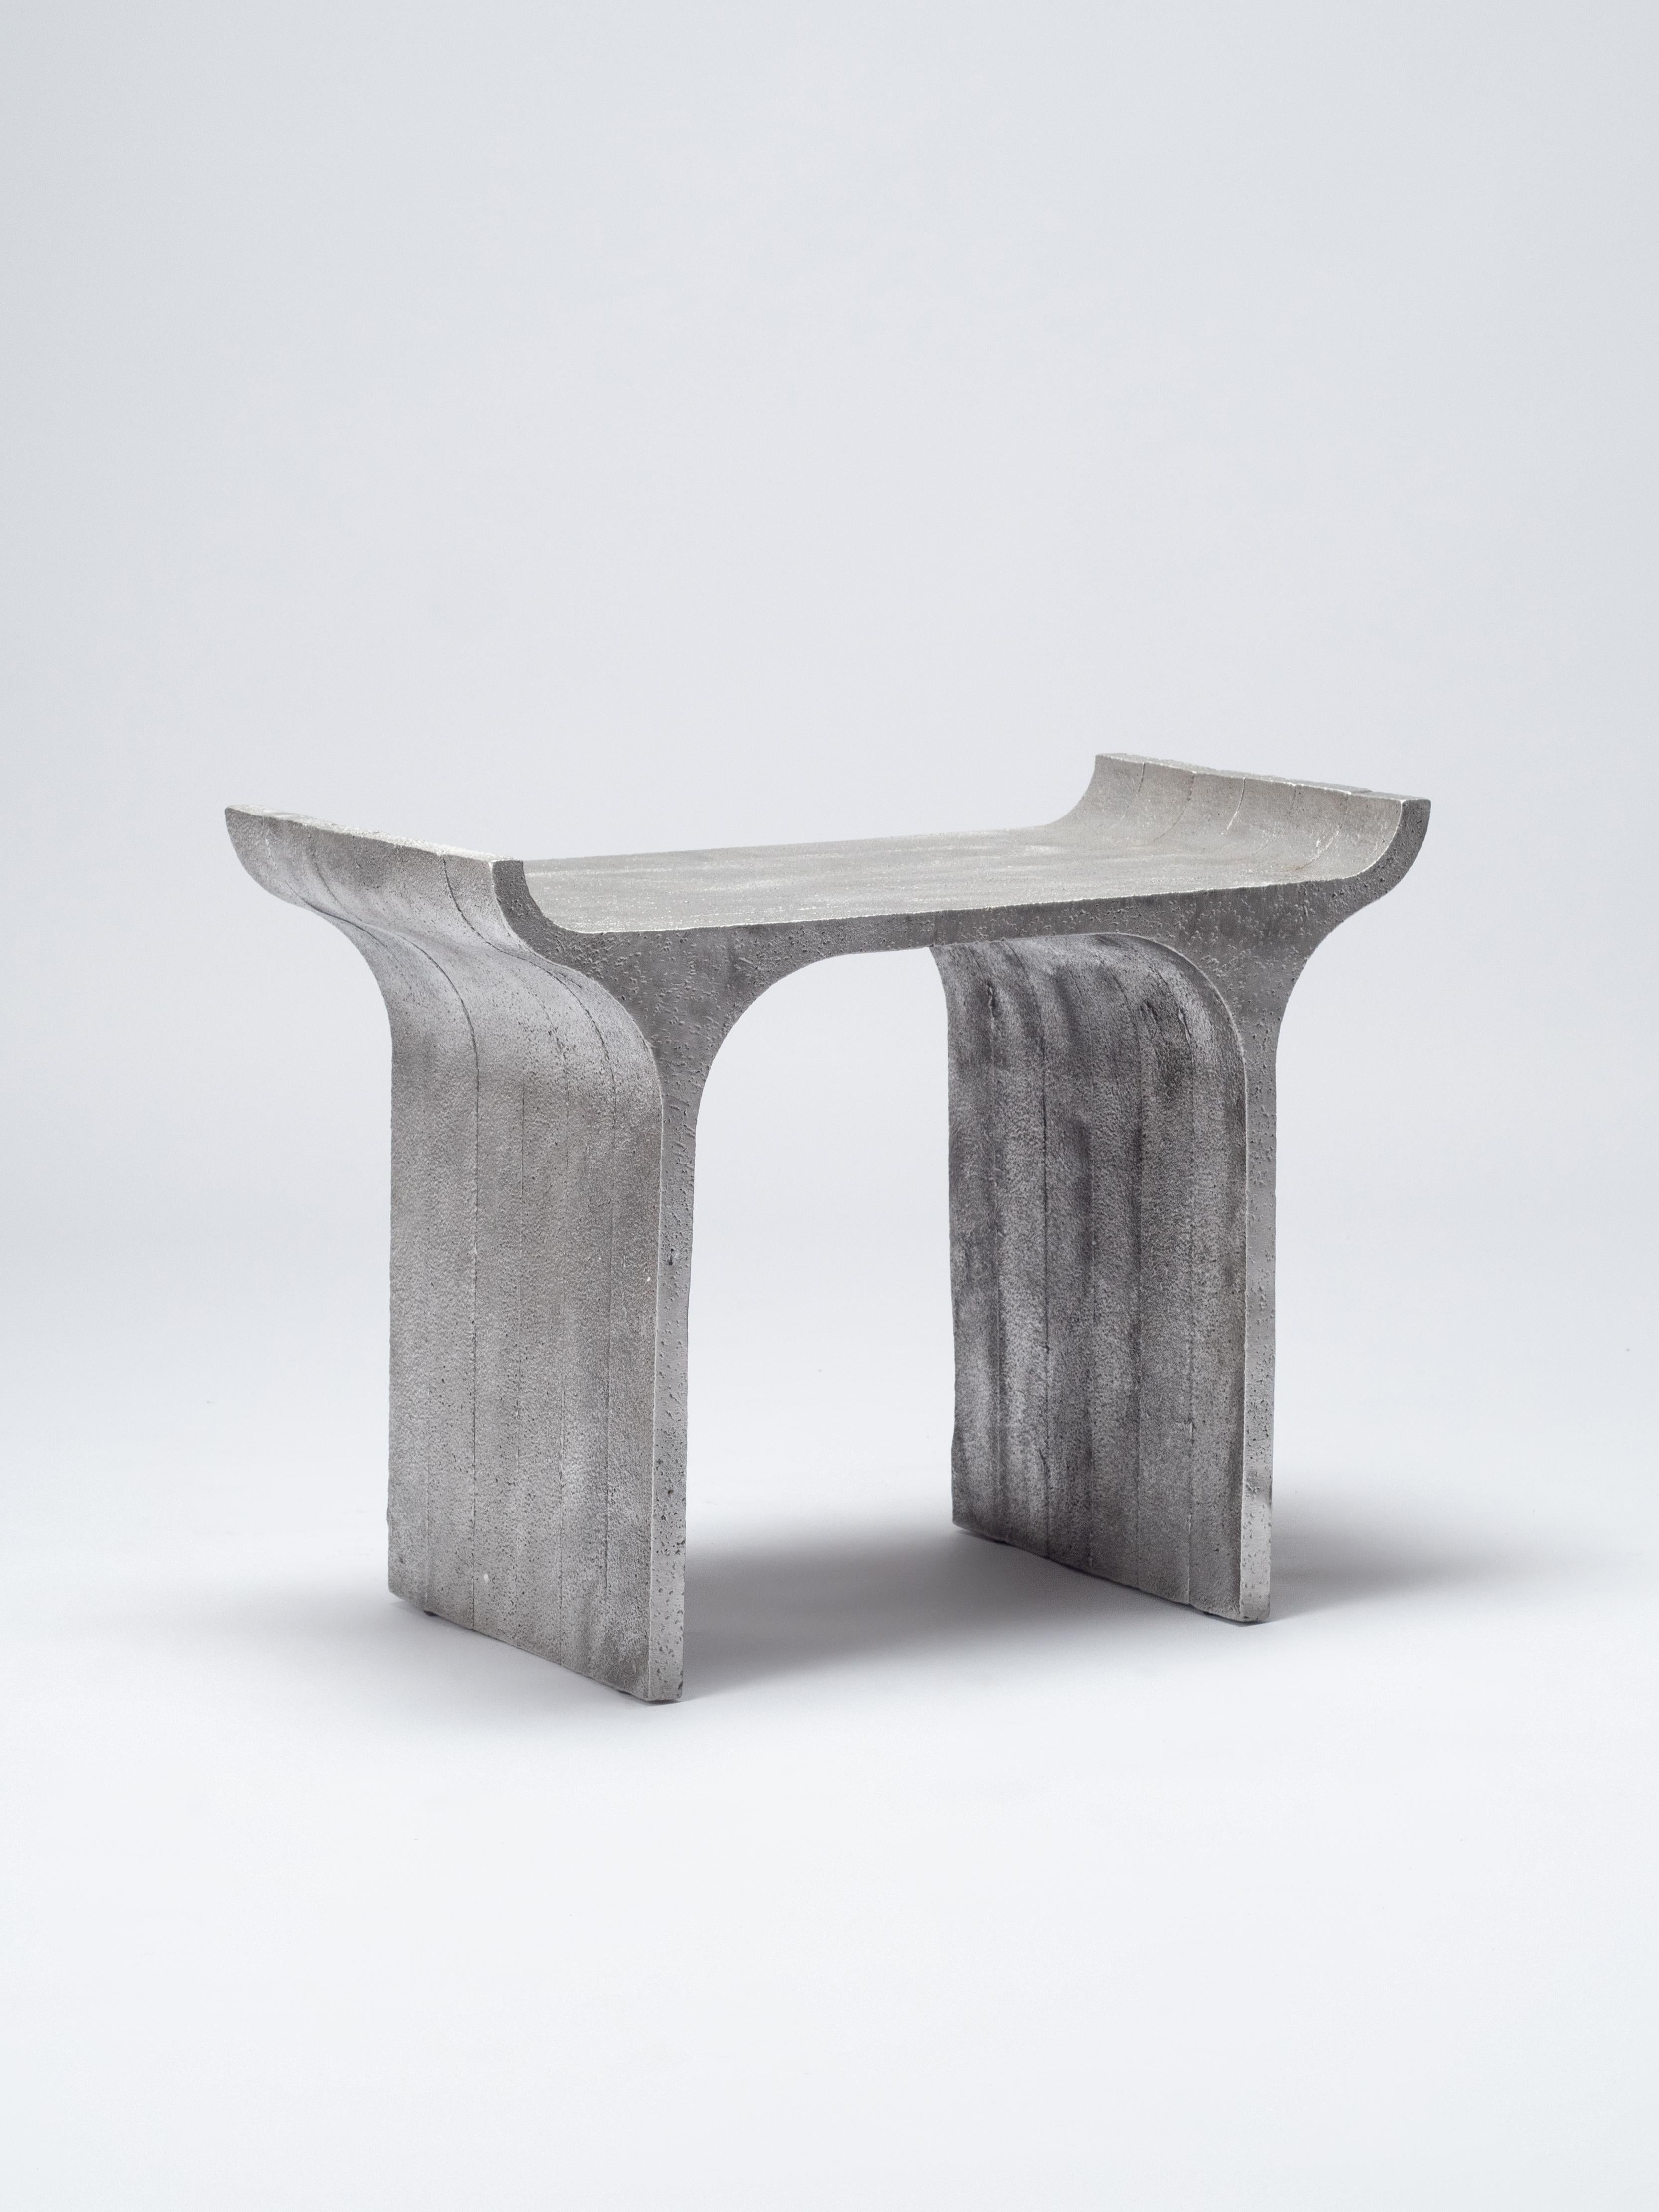 Tori is a stool of variable dimensions inspired by the Japanese arch that marks the boundary between profane and sacred space.

This edition is, on the one hand, our first experience in cast aluminum and on the other hand –we hope– the beginning of